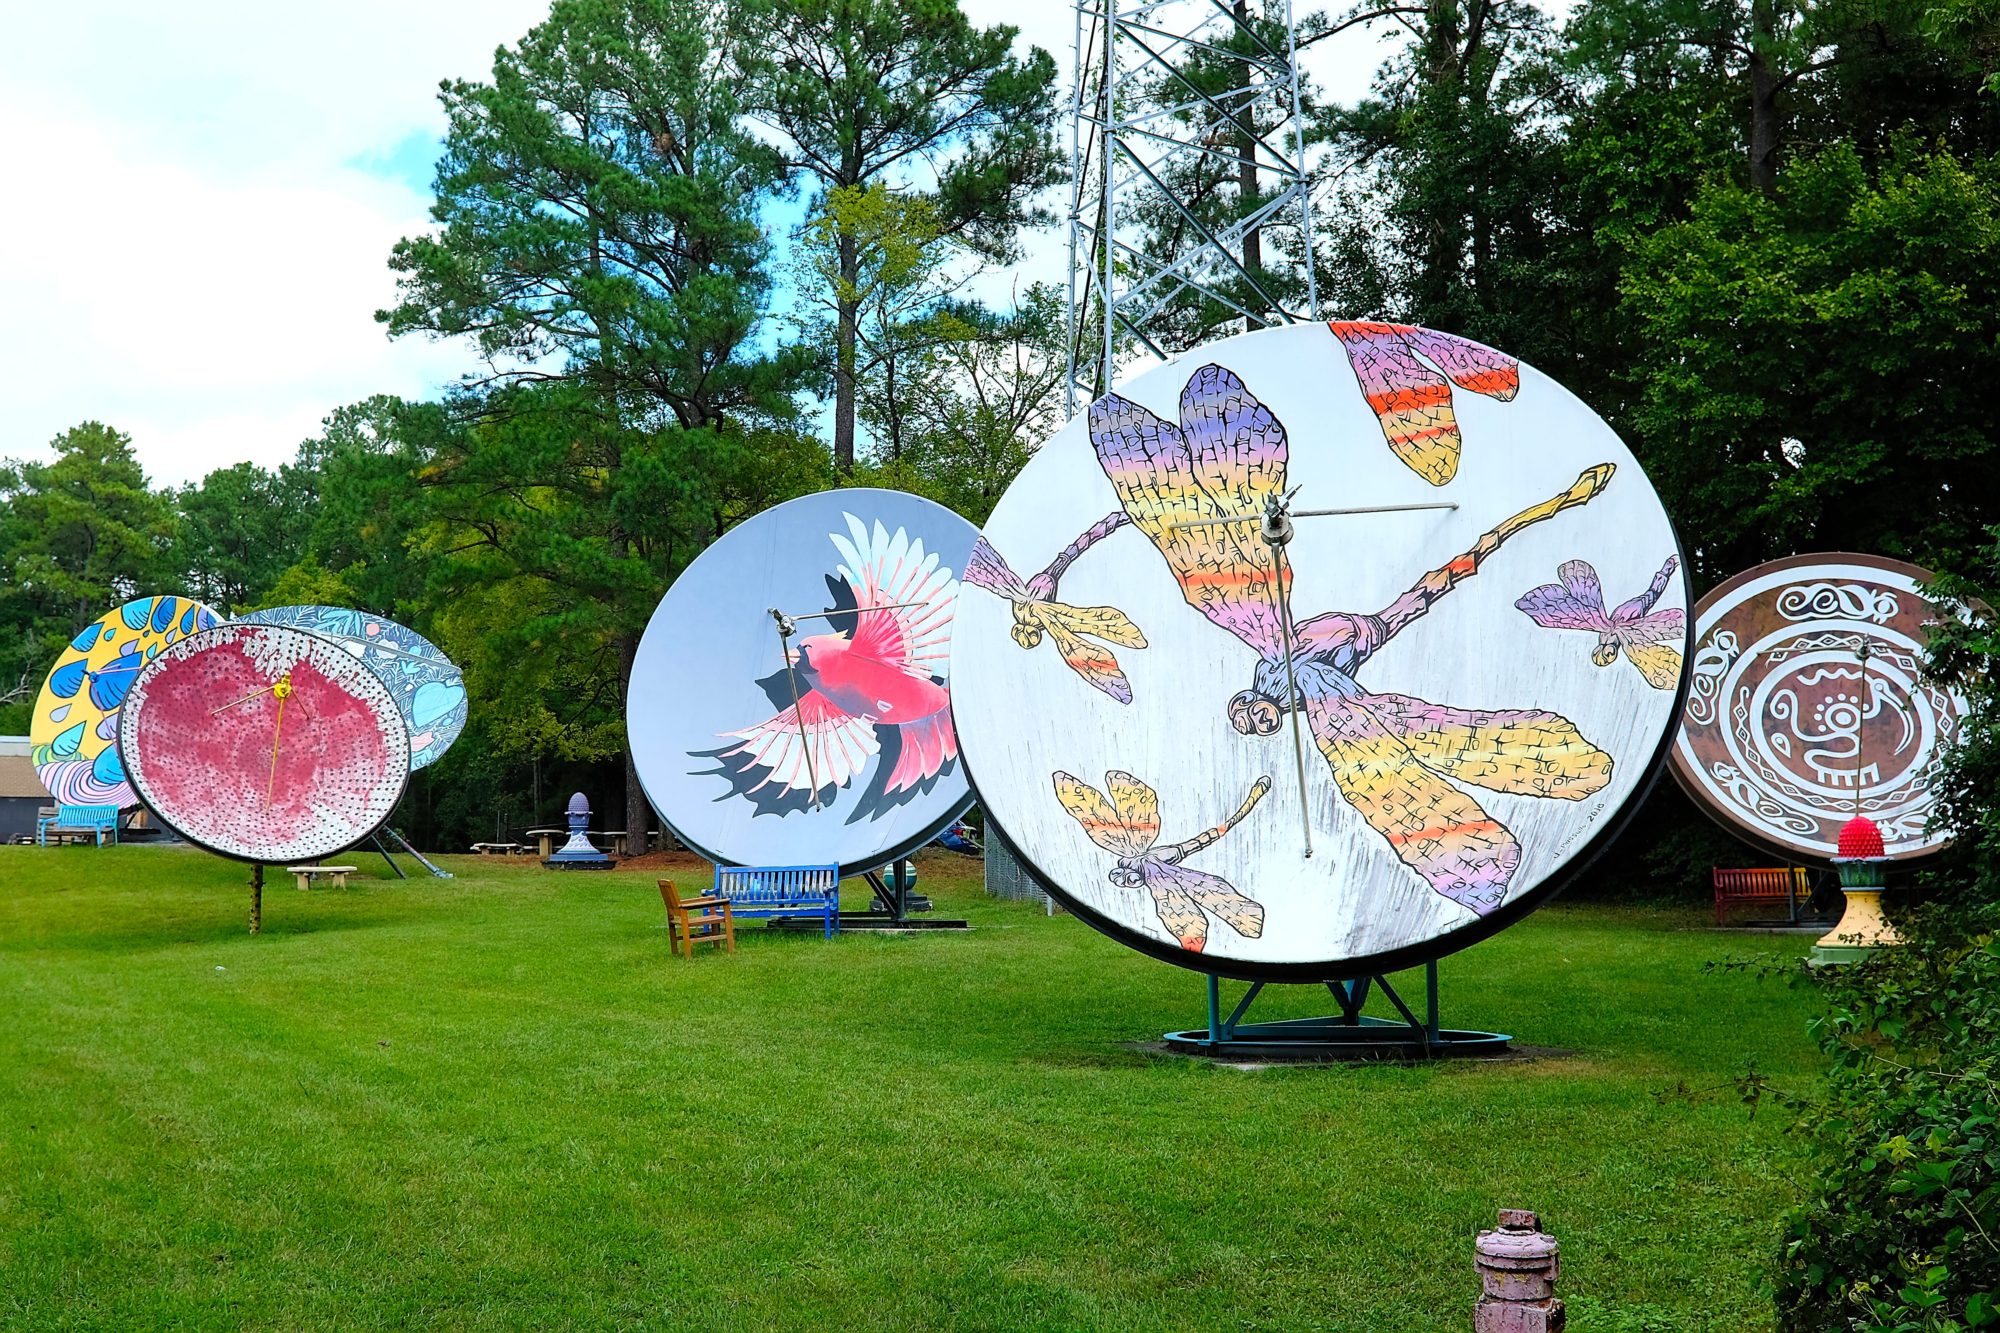 A collection of satellite dishes with murals